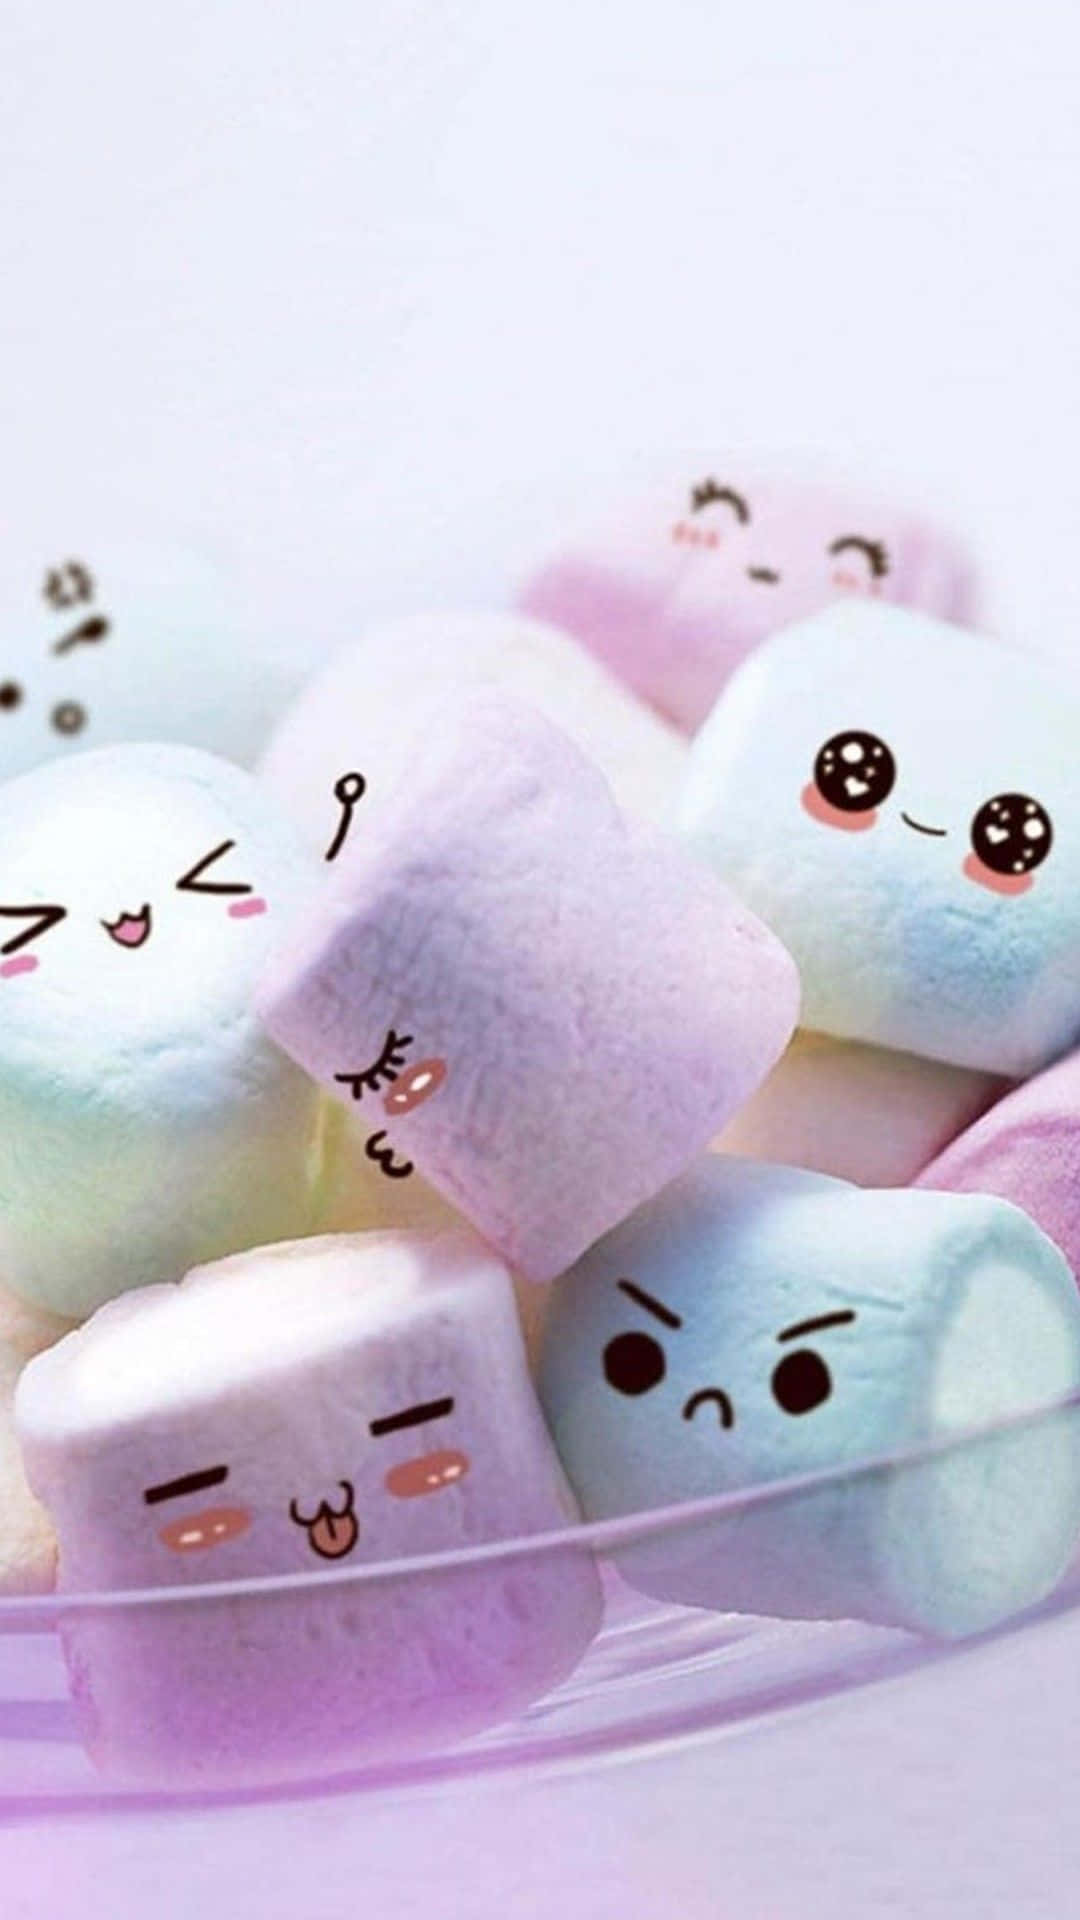 Cute Background Of Marshmallows With Faces